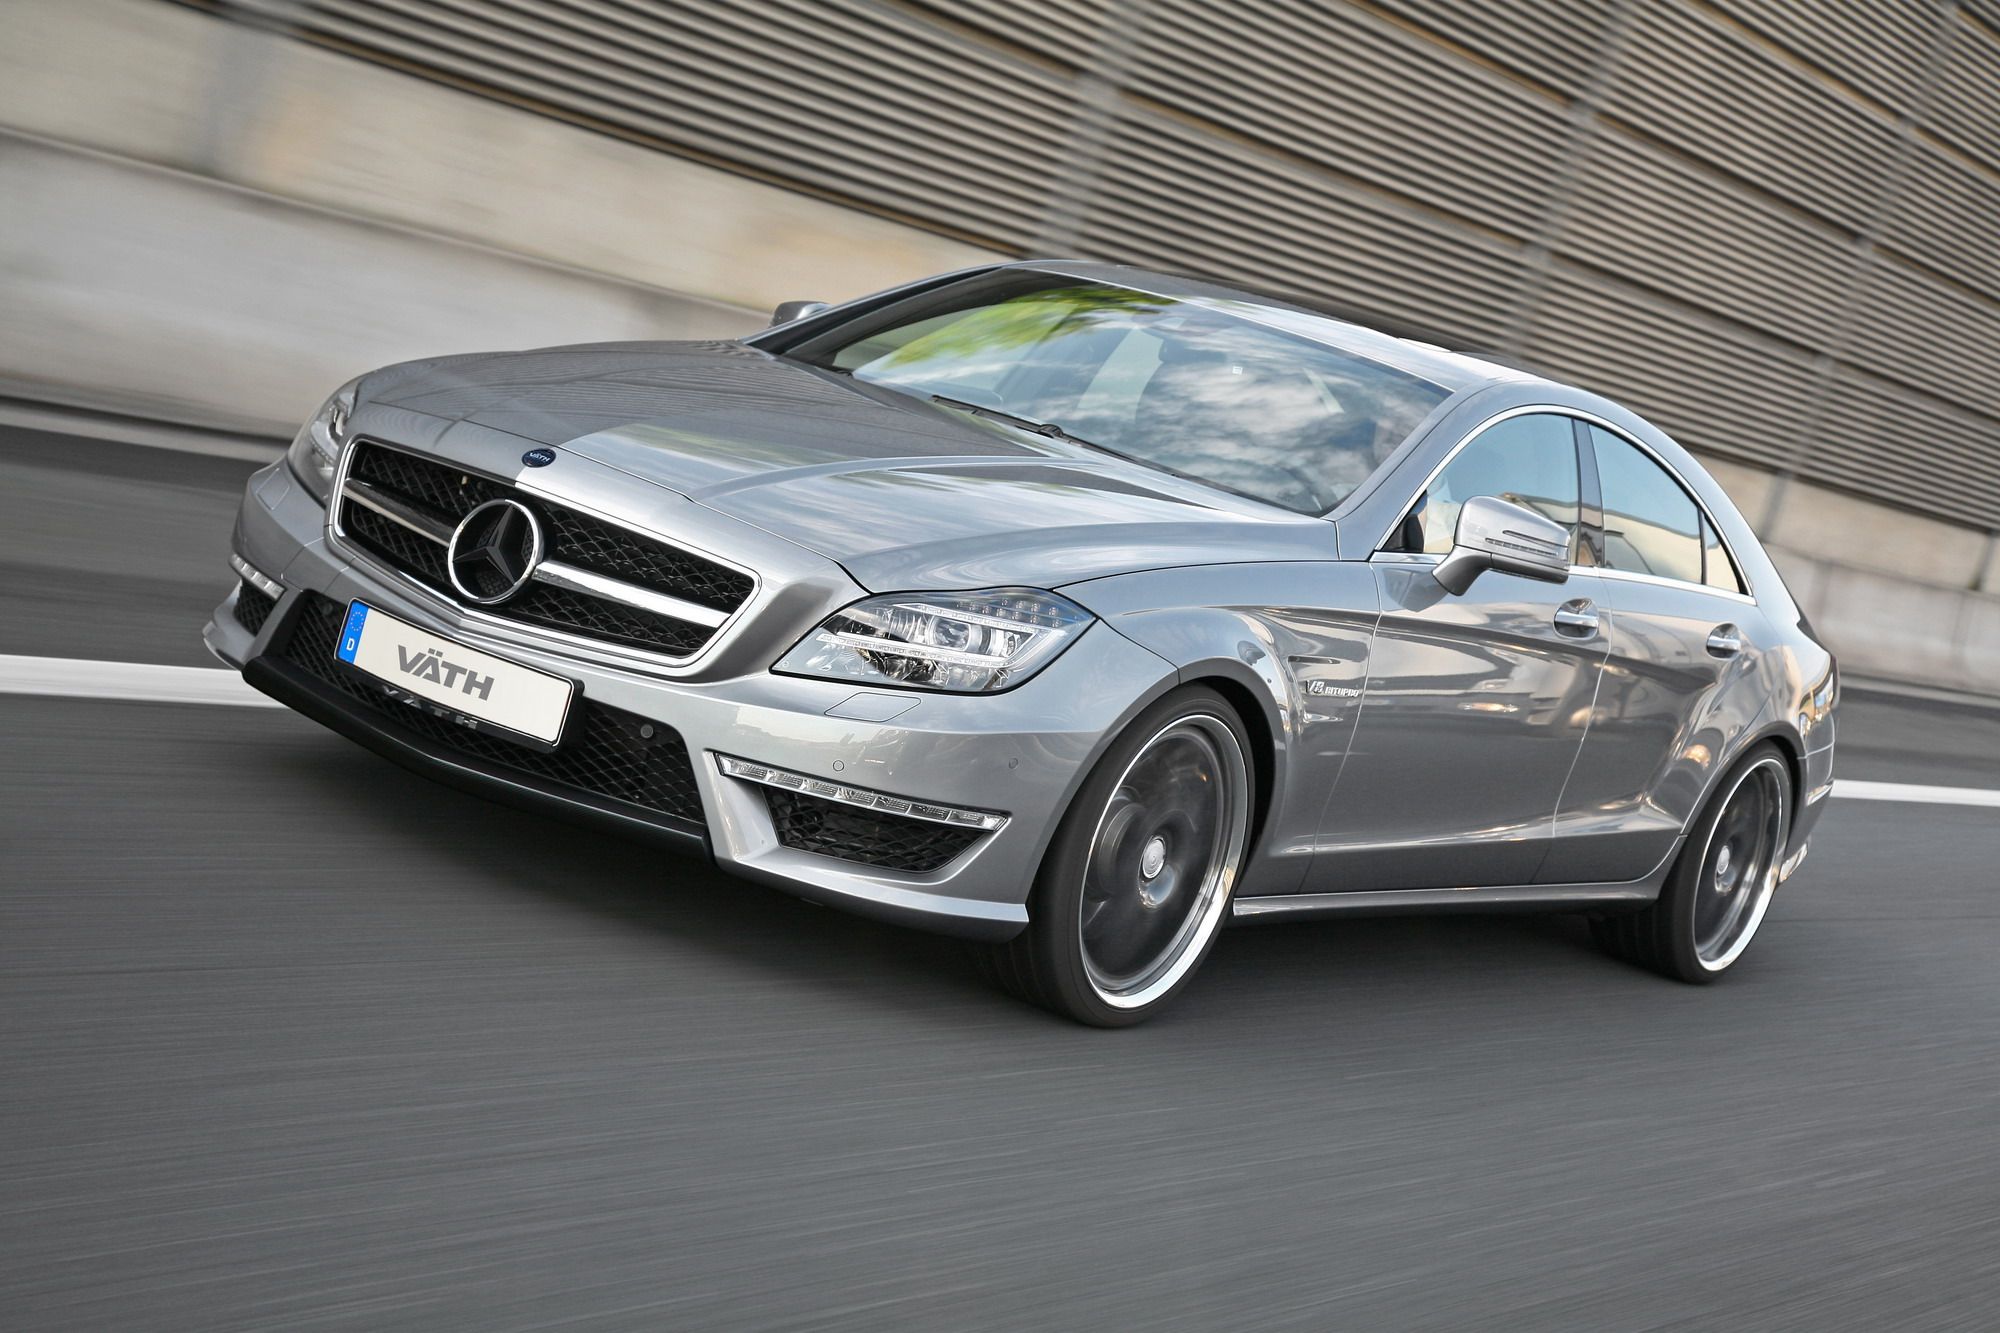 2012 Mercedes CLS 63 AMG by Vath